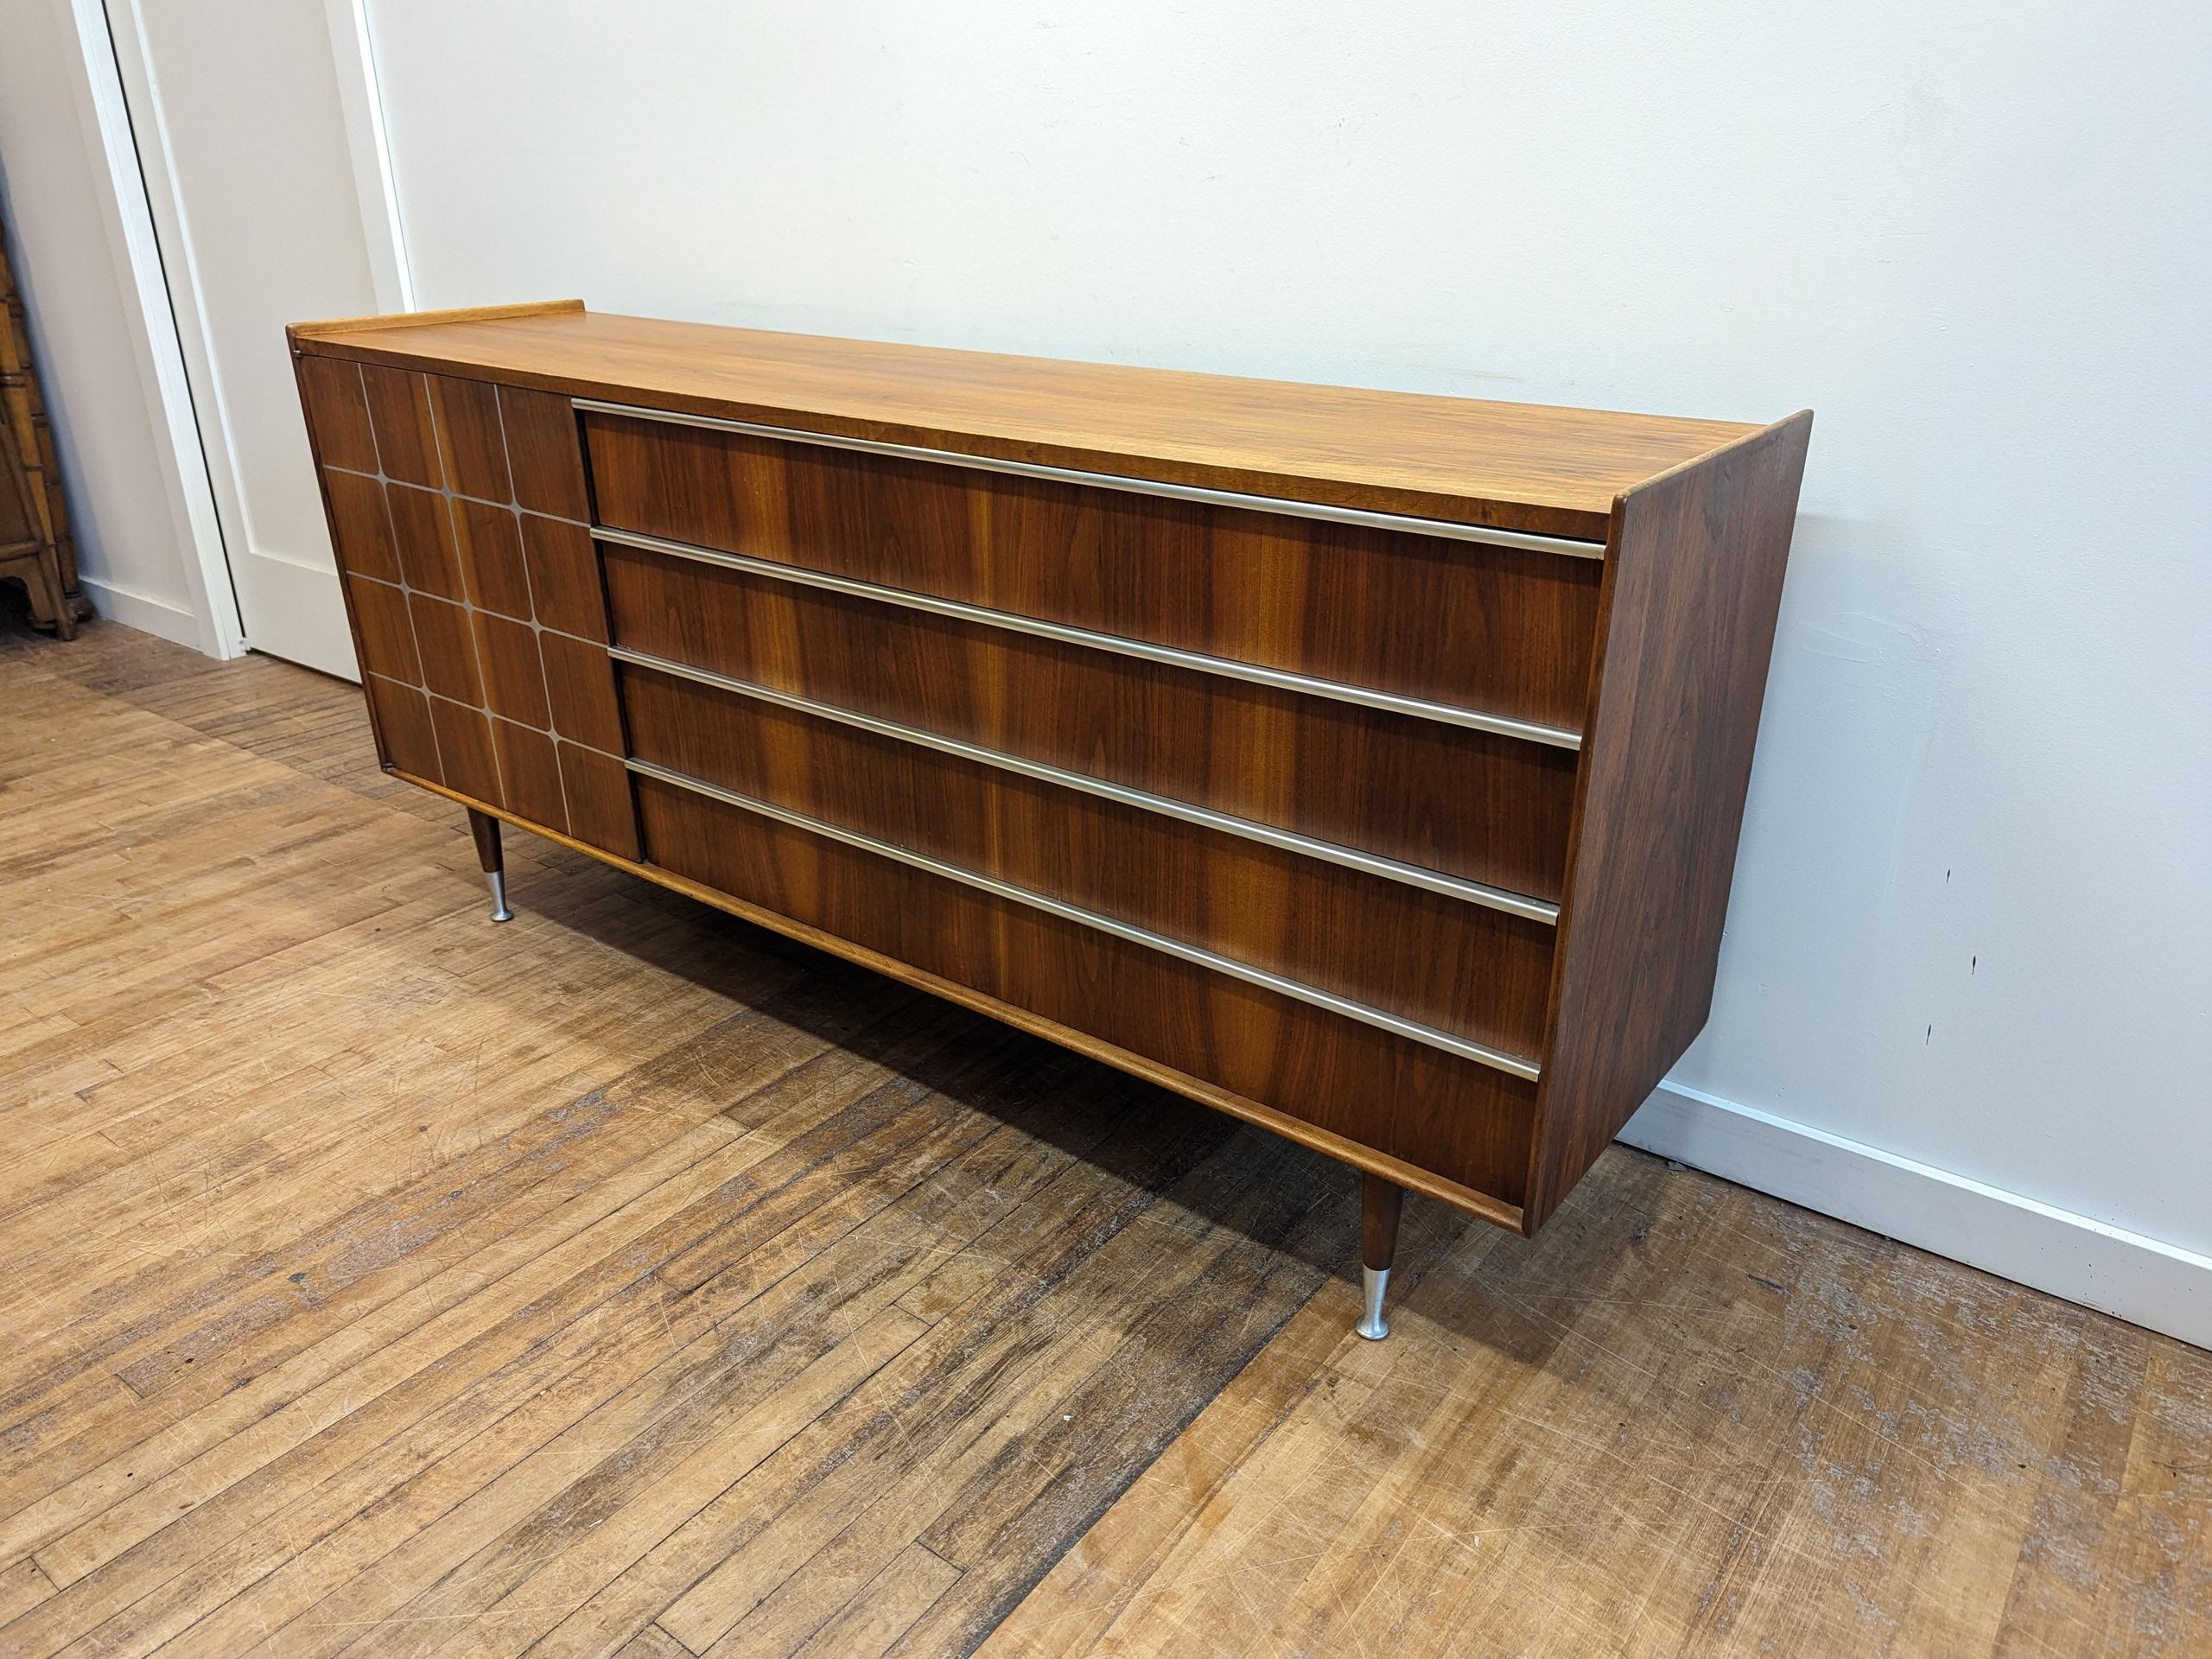 Edmond Spence Walnut Credenza Sideboard.  Mid century credenza designed by Edmond J. Spence in walnut with aluminum pattern inlay to the door, aluminum track handles and raised edge sides.  Legs are tapered with aluminum sabot feet.  Inside has